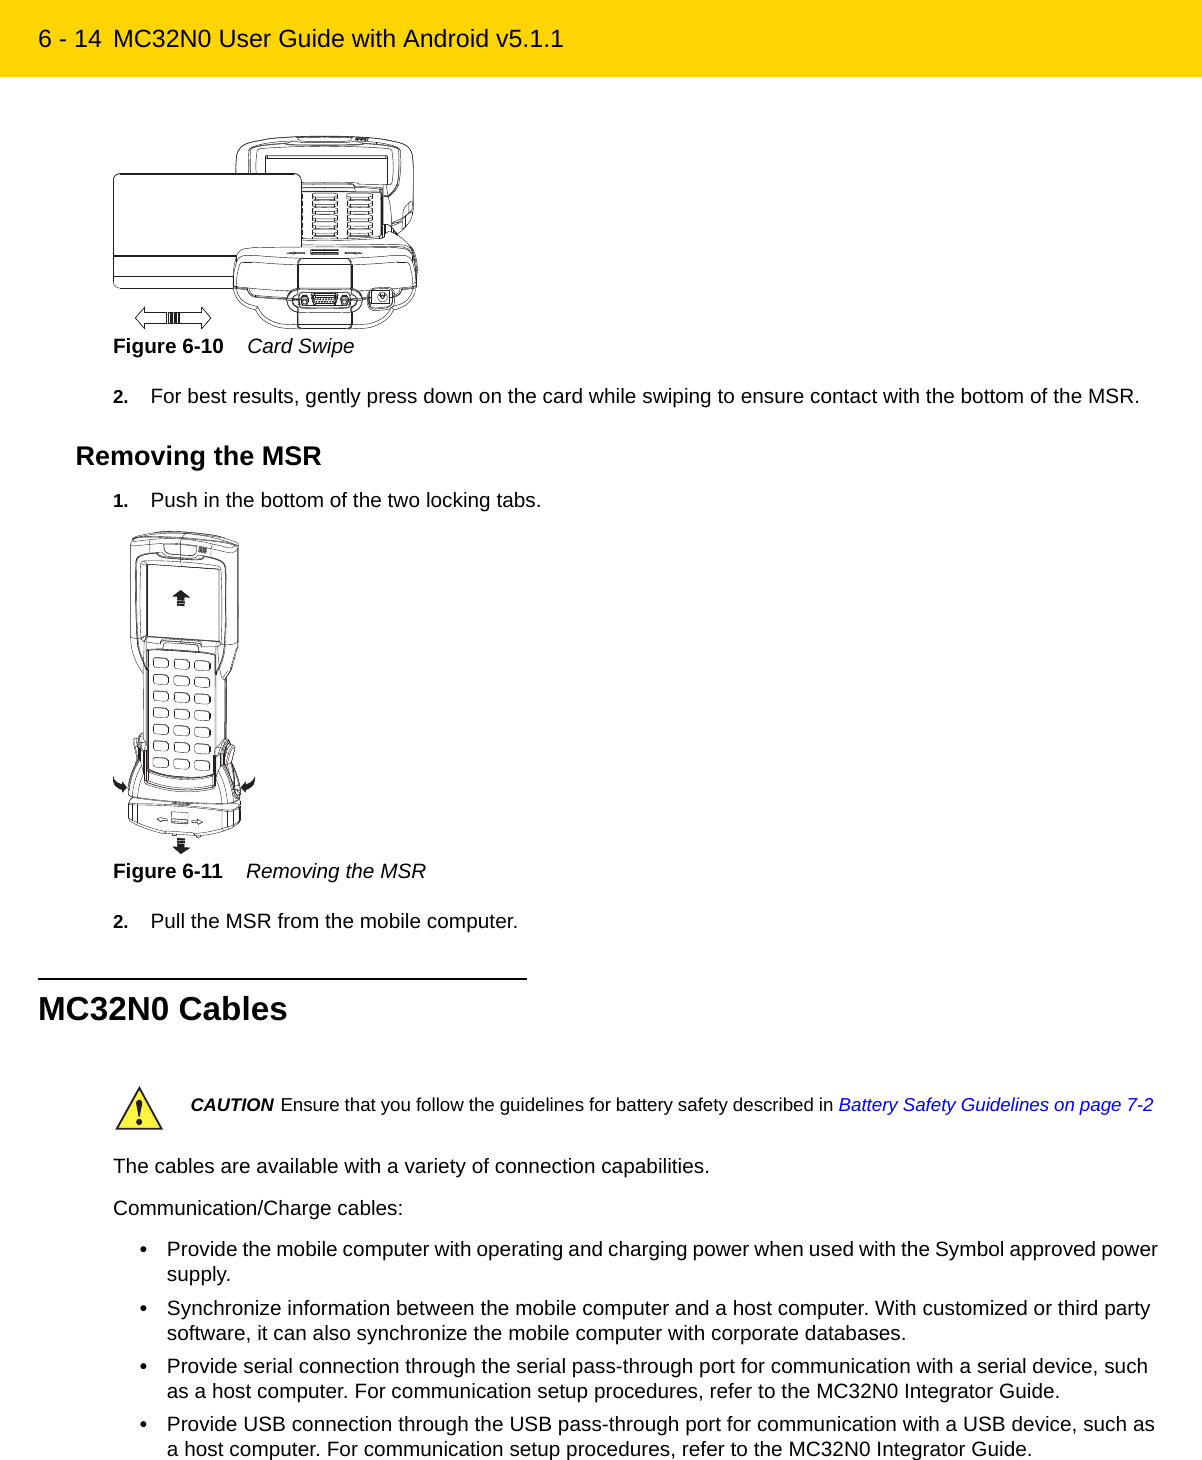 6 - 14 MC32N0 User Guide with Android v5.1.1Figure 6-10    Card Swipe2. For best results, gently press down on the card while swiping to ensure contact with the bottom of the MSR.Removing the MSR1. Push in the bottom of the two locking tabs.Figure 6-11    Removing the MSR2. Pull the MSR from the mobile computer.MC32N0 CablesThe cables are available with a variety of connection capabilities.Communication/Charge cables:•Provide the mobile computer with operating and charging power when used with the Symbol approved power supply.•Synchronize information between the mobile computer and a host computer. With customized or third party software, it can also synchronize the mobile computer with corporate databases.•Provide serial connection through the serial pass-through port for communication with a serial device, such as a host computer. For communication setup procedures, refer to the MC32N0 Integrator Guide.•Provide USB connection through the USB pass-through port for communication with a USB device, such as a host computer. For communication setup procedures, refer to the MC32N0 Integrator Guide.CAUTION Ensure that you follow the guidelines for battery safety described in Battery Safety Guidelines on page 7-2REVIEW ONLY - REVIEW ONLY - REVIEW ONLY                             REVIEW ONLY - REVIEW ONLY - REVIEW ONLY